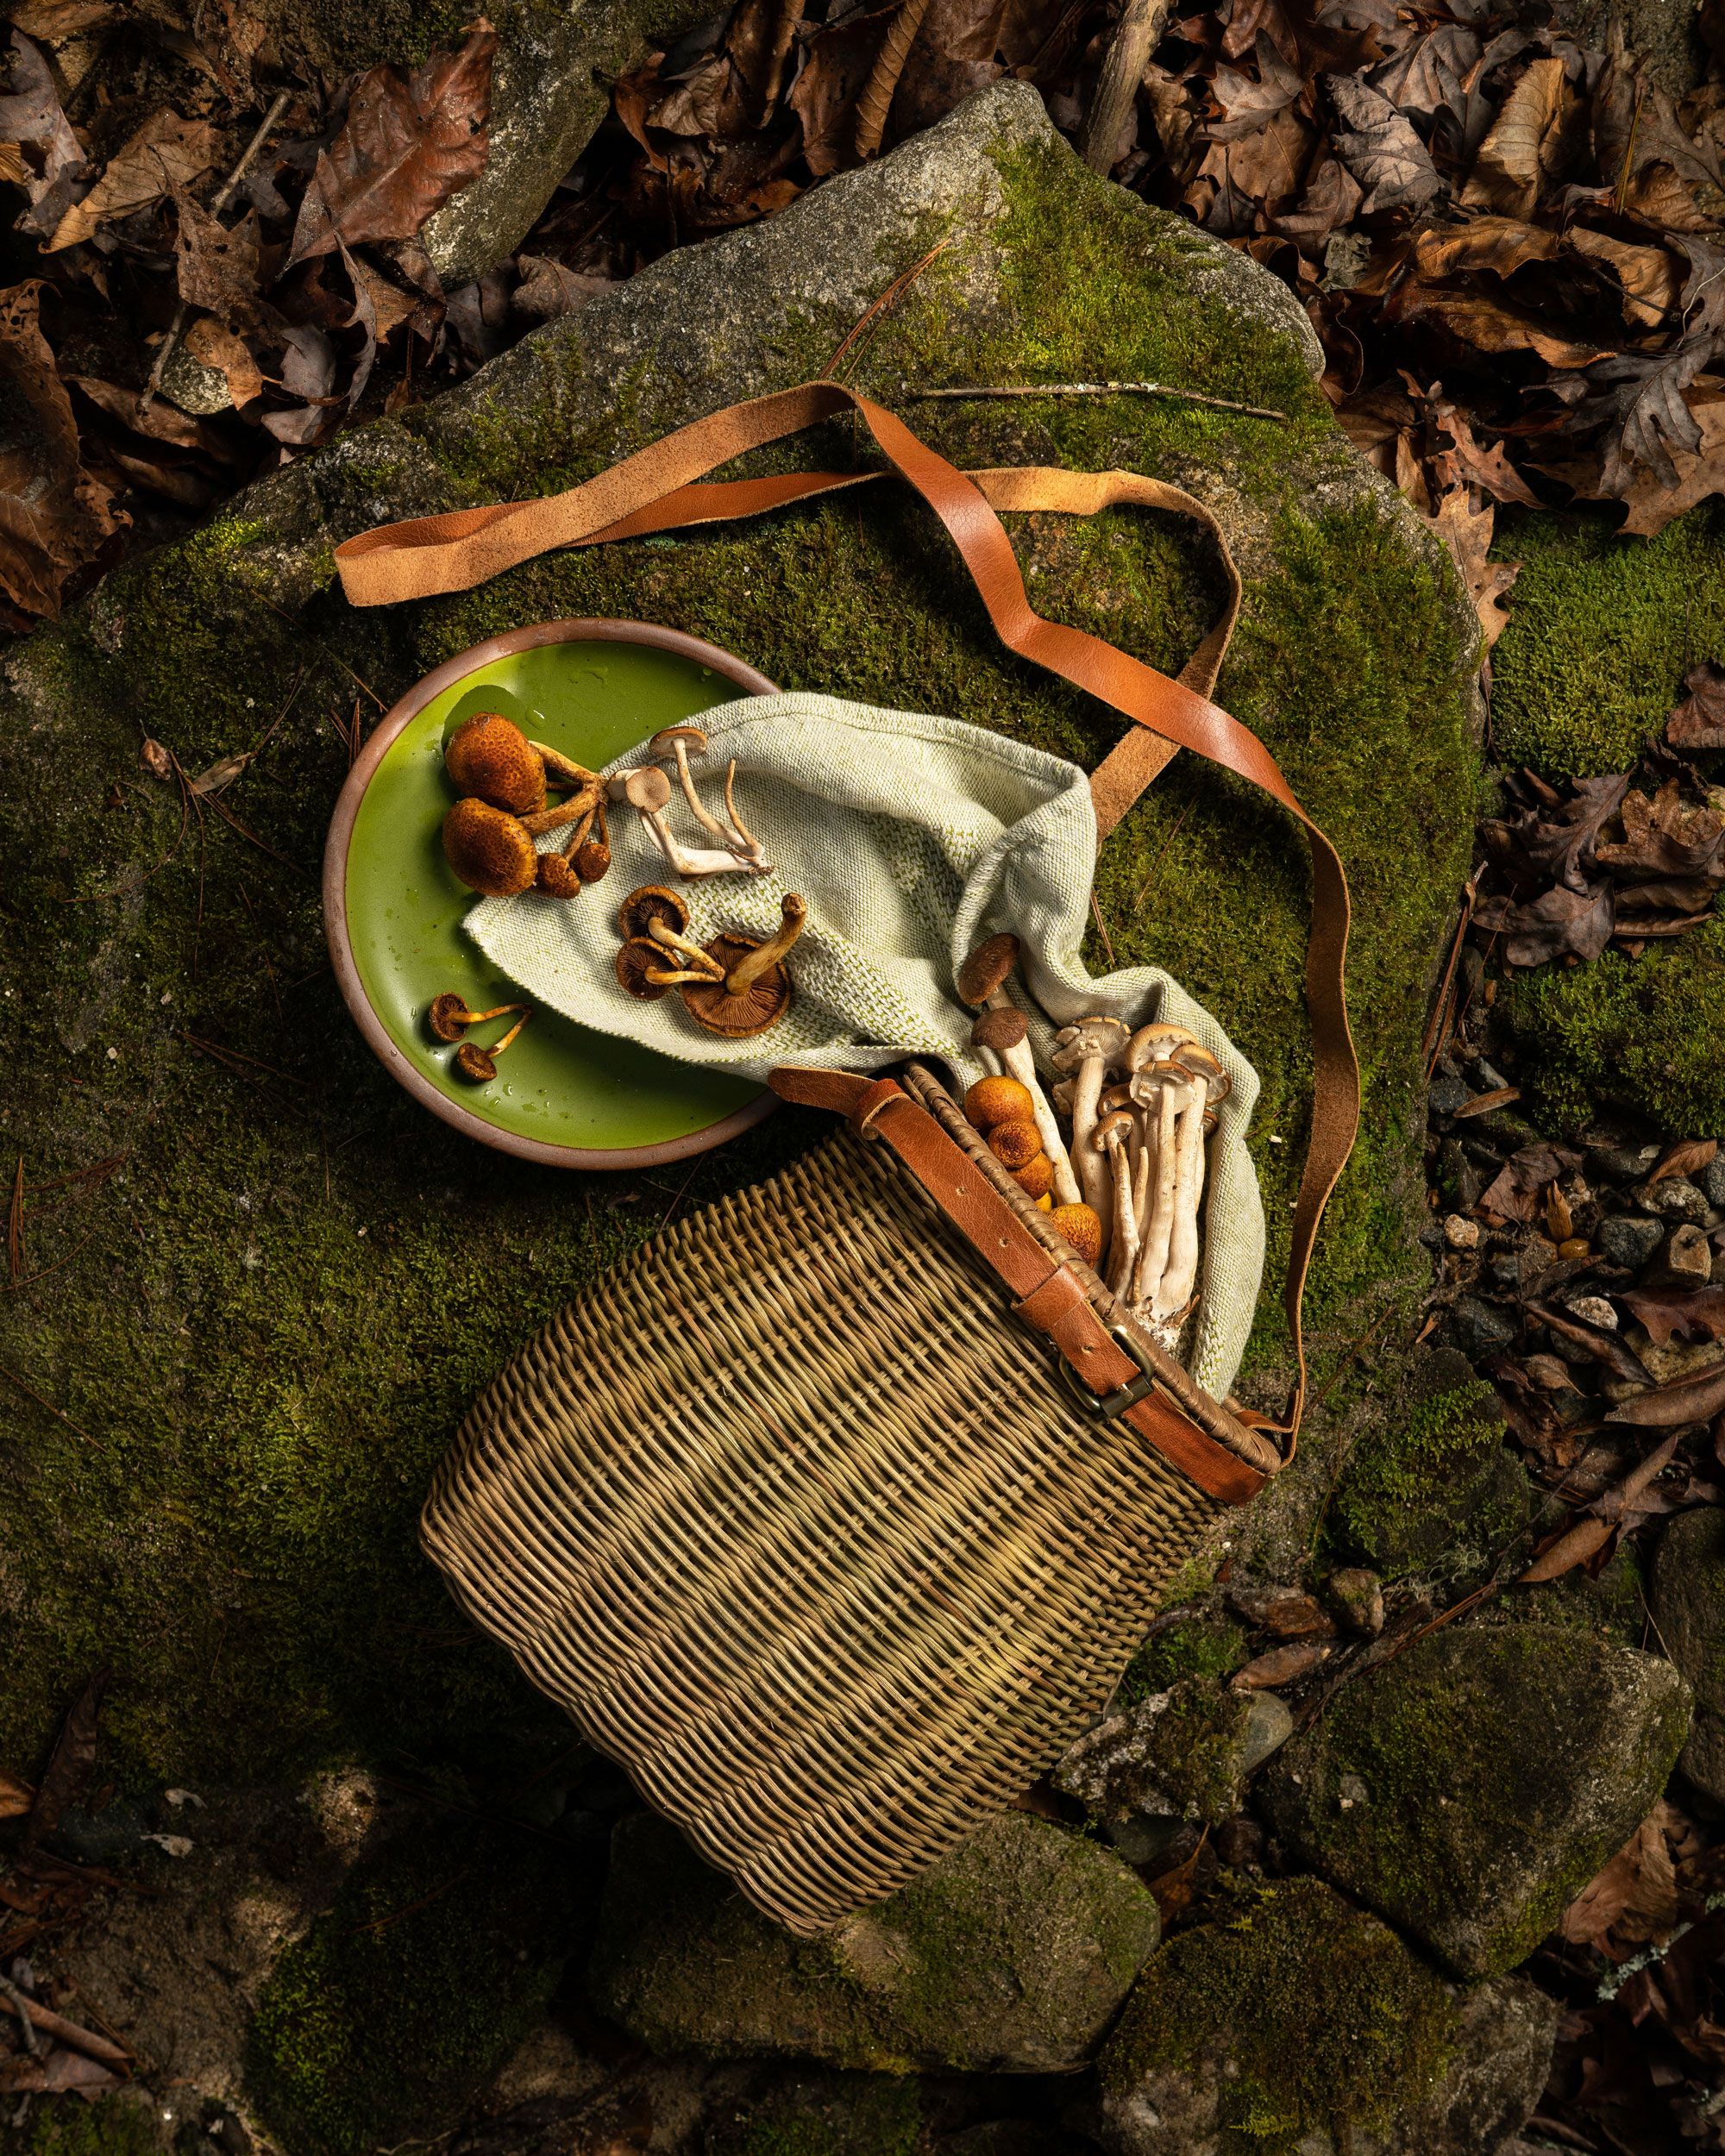 Mushrooms fall out of a wicker foraging basket with a leather strap that is photographed alongside a green East Fork stoneware plate on a mossy rock in the forest.